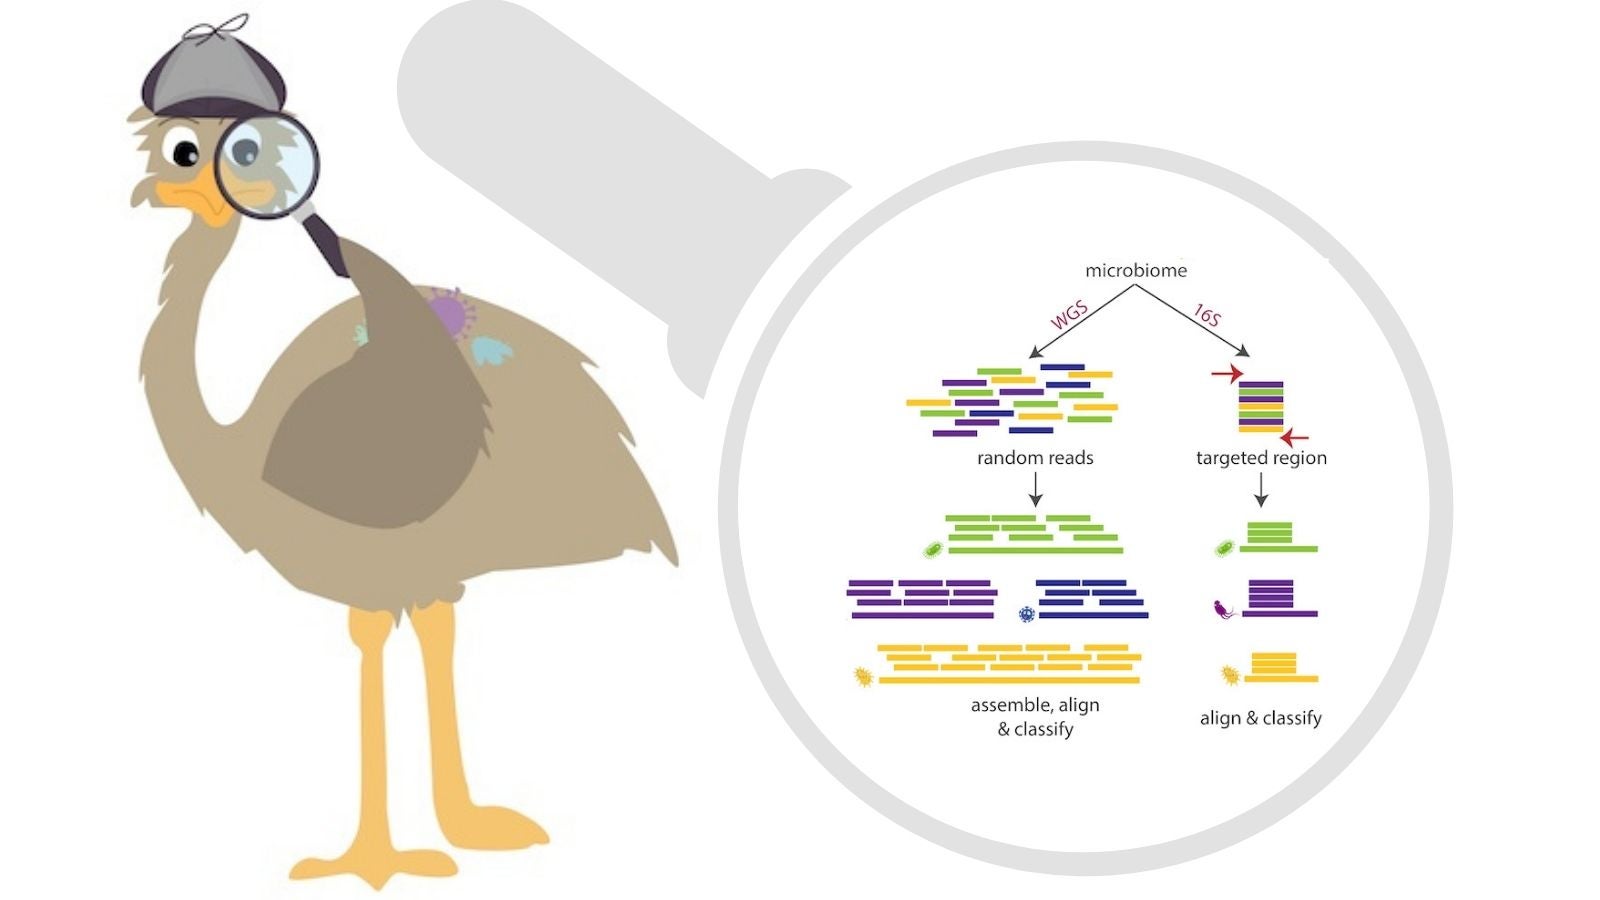 Emu stands tall at detecting bacteria species